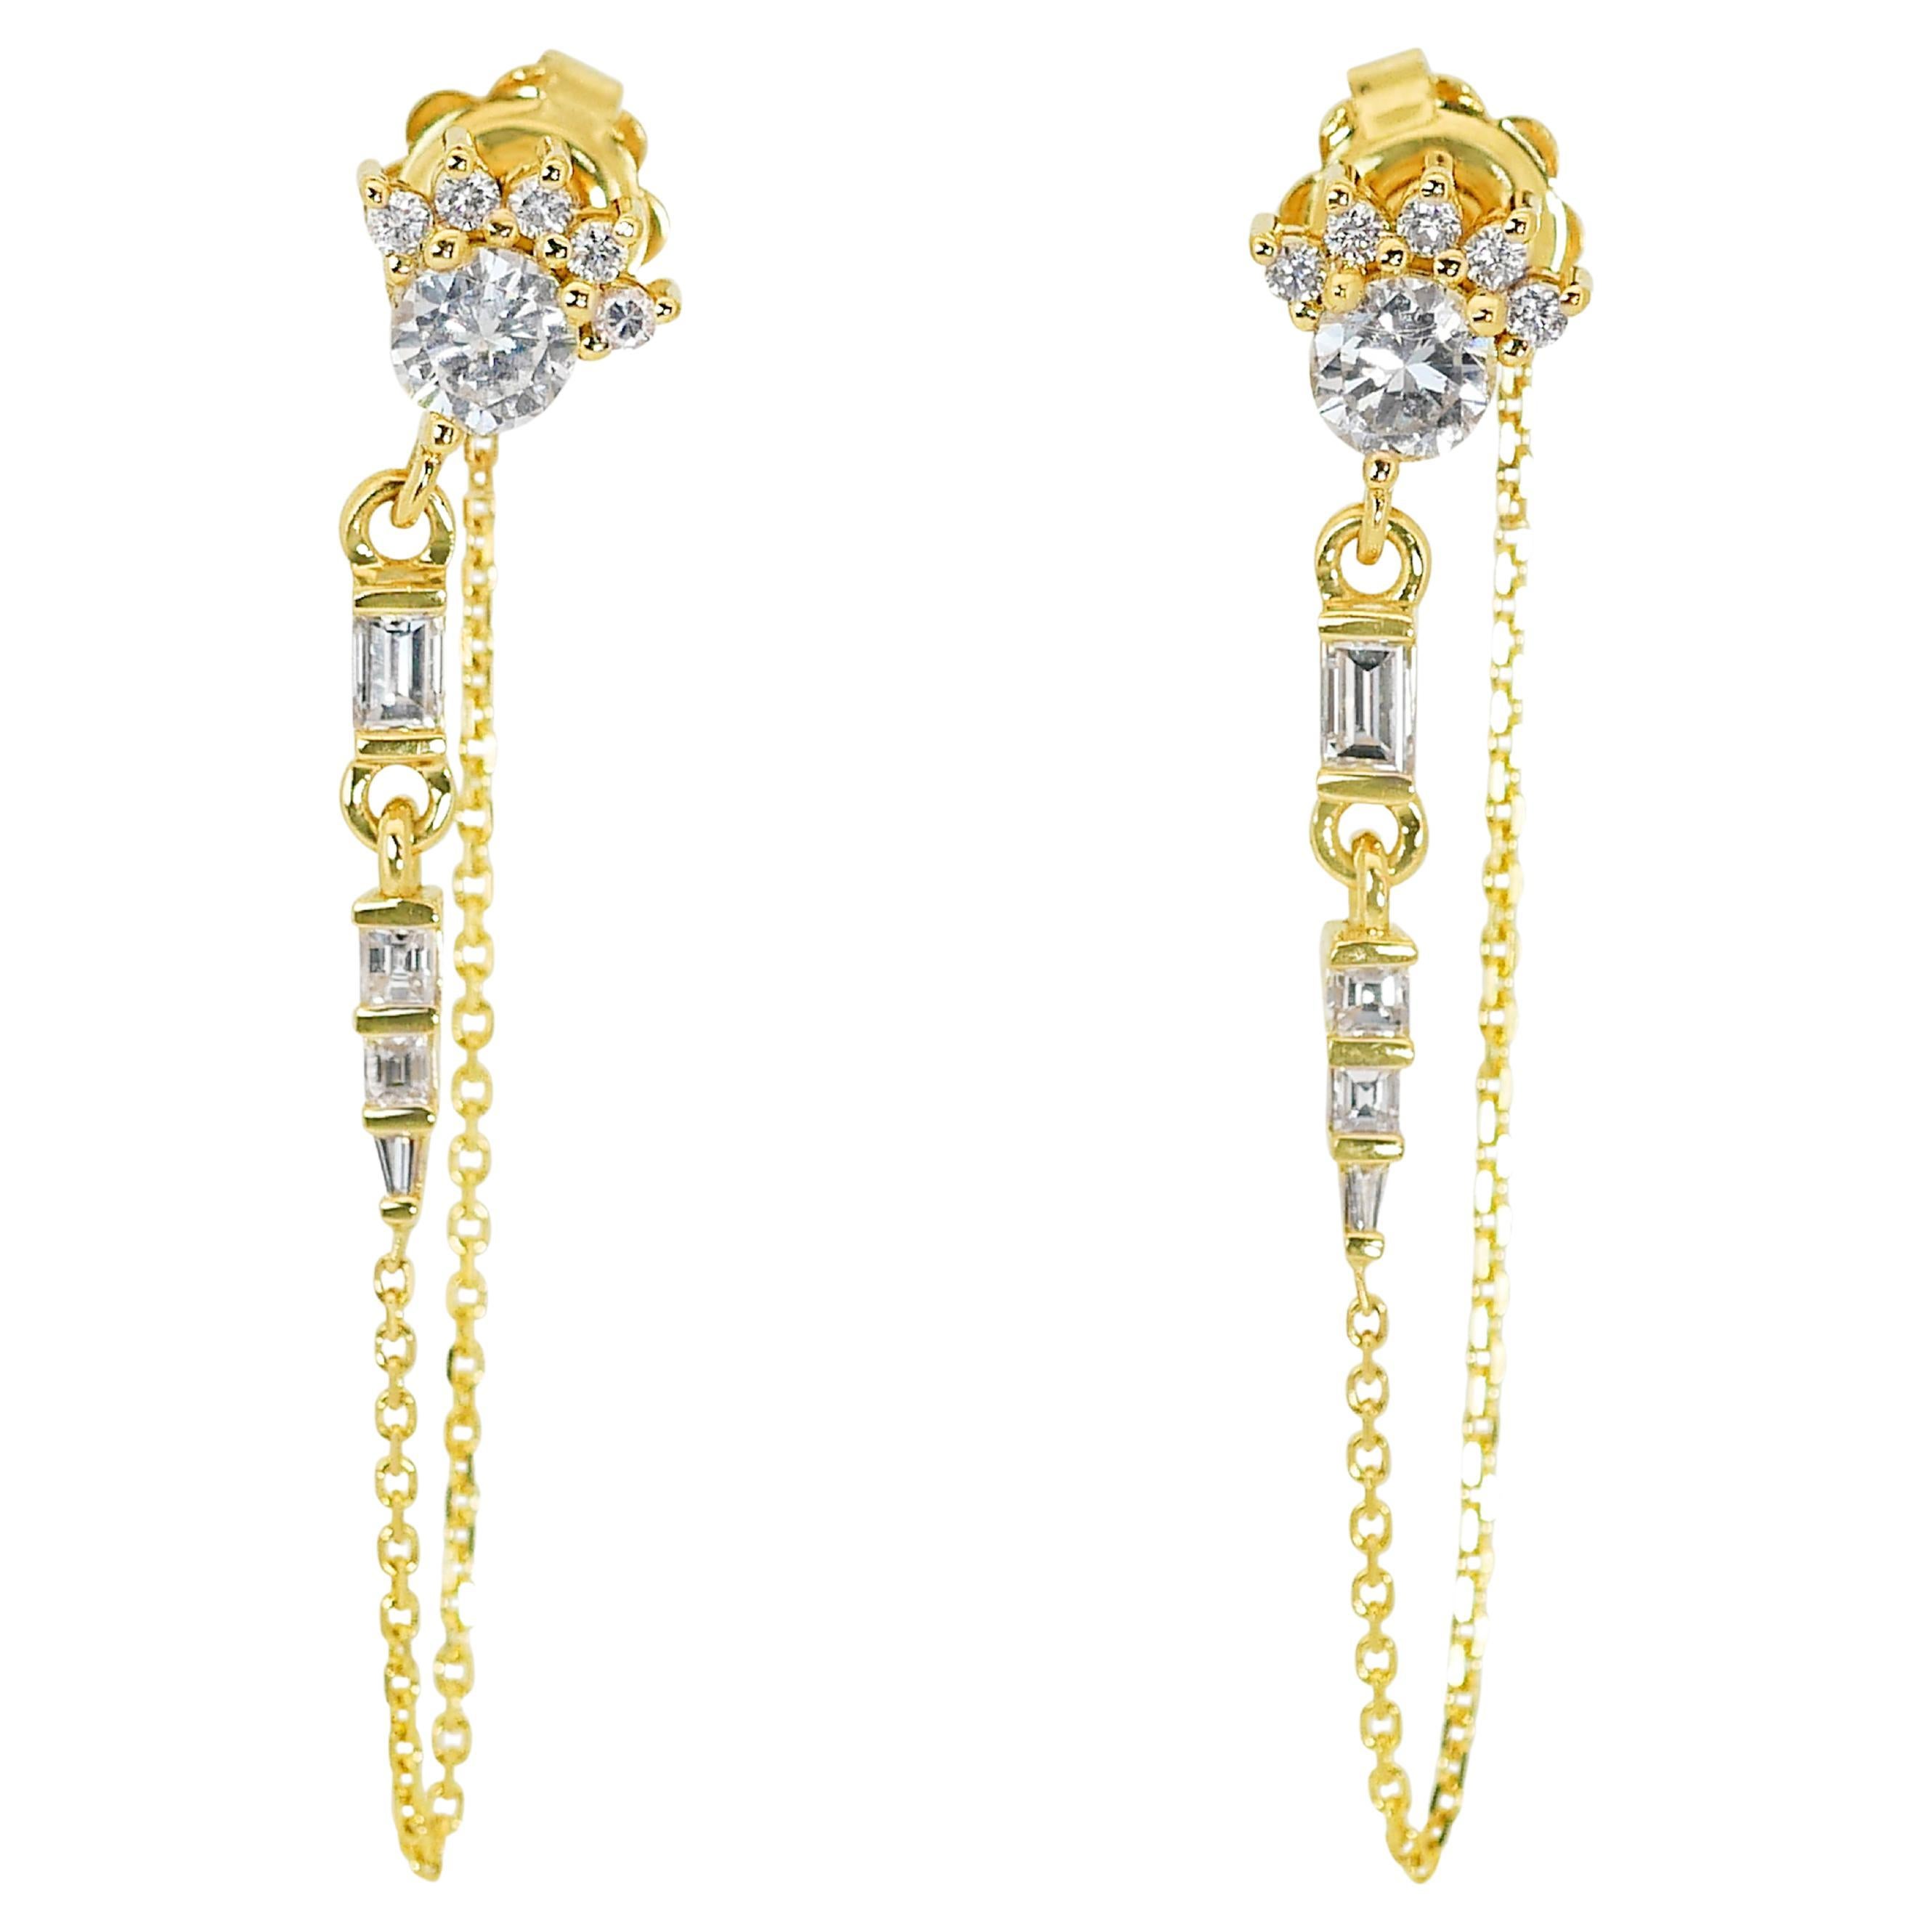 Fascinating 18K Yellow Gold Diamond Drop Earrings with 1.19ct - IGI Certified For Sale